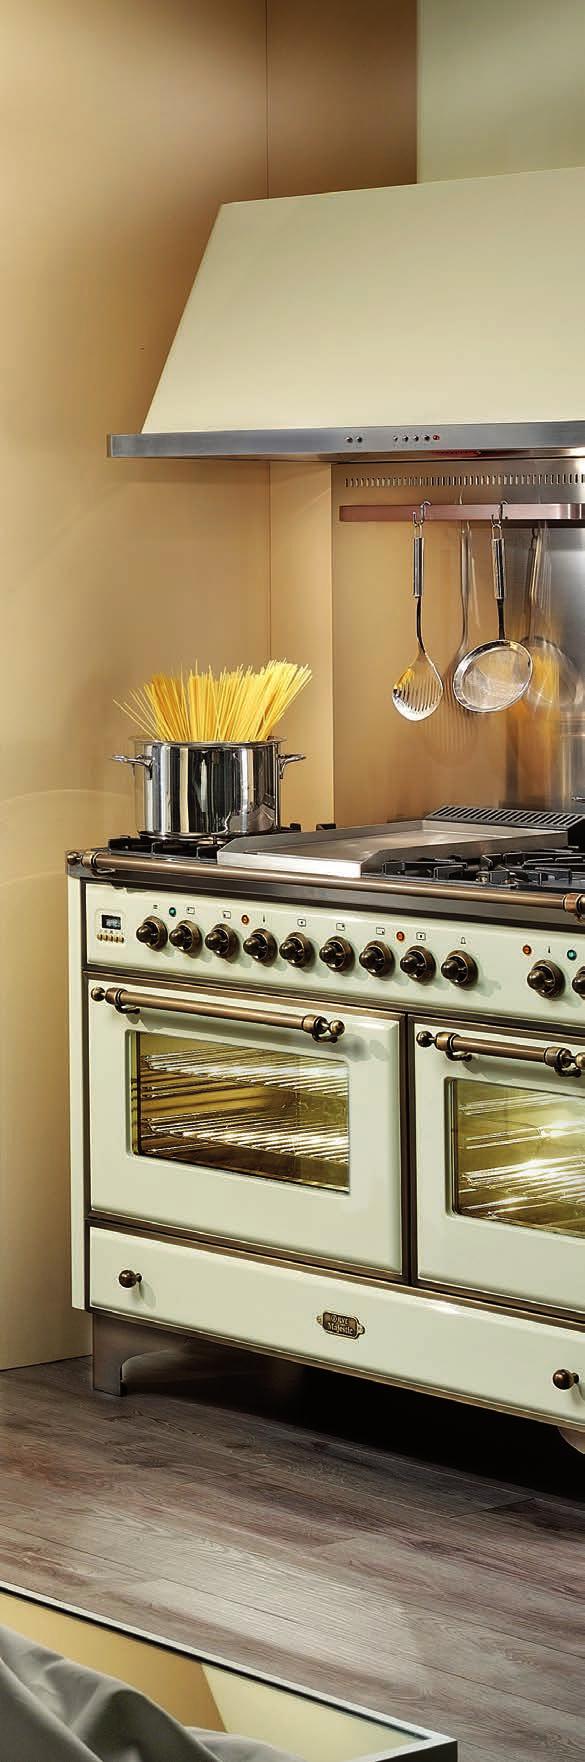 Contents The best kept secret in range cooking 6 ILVE range cookers 8 Unique ILVE features 10 ILVE hob configurations 12 ILVE oven functions 14 Roma Collection 18 Milano Collection 32 Majestic Roma